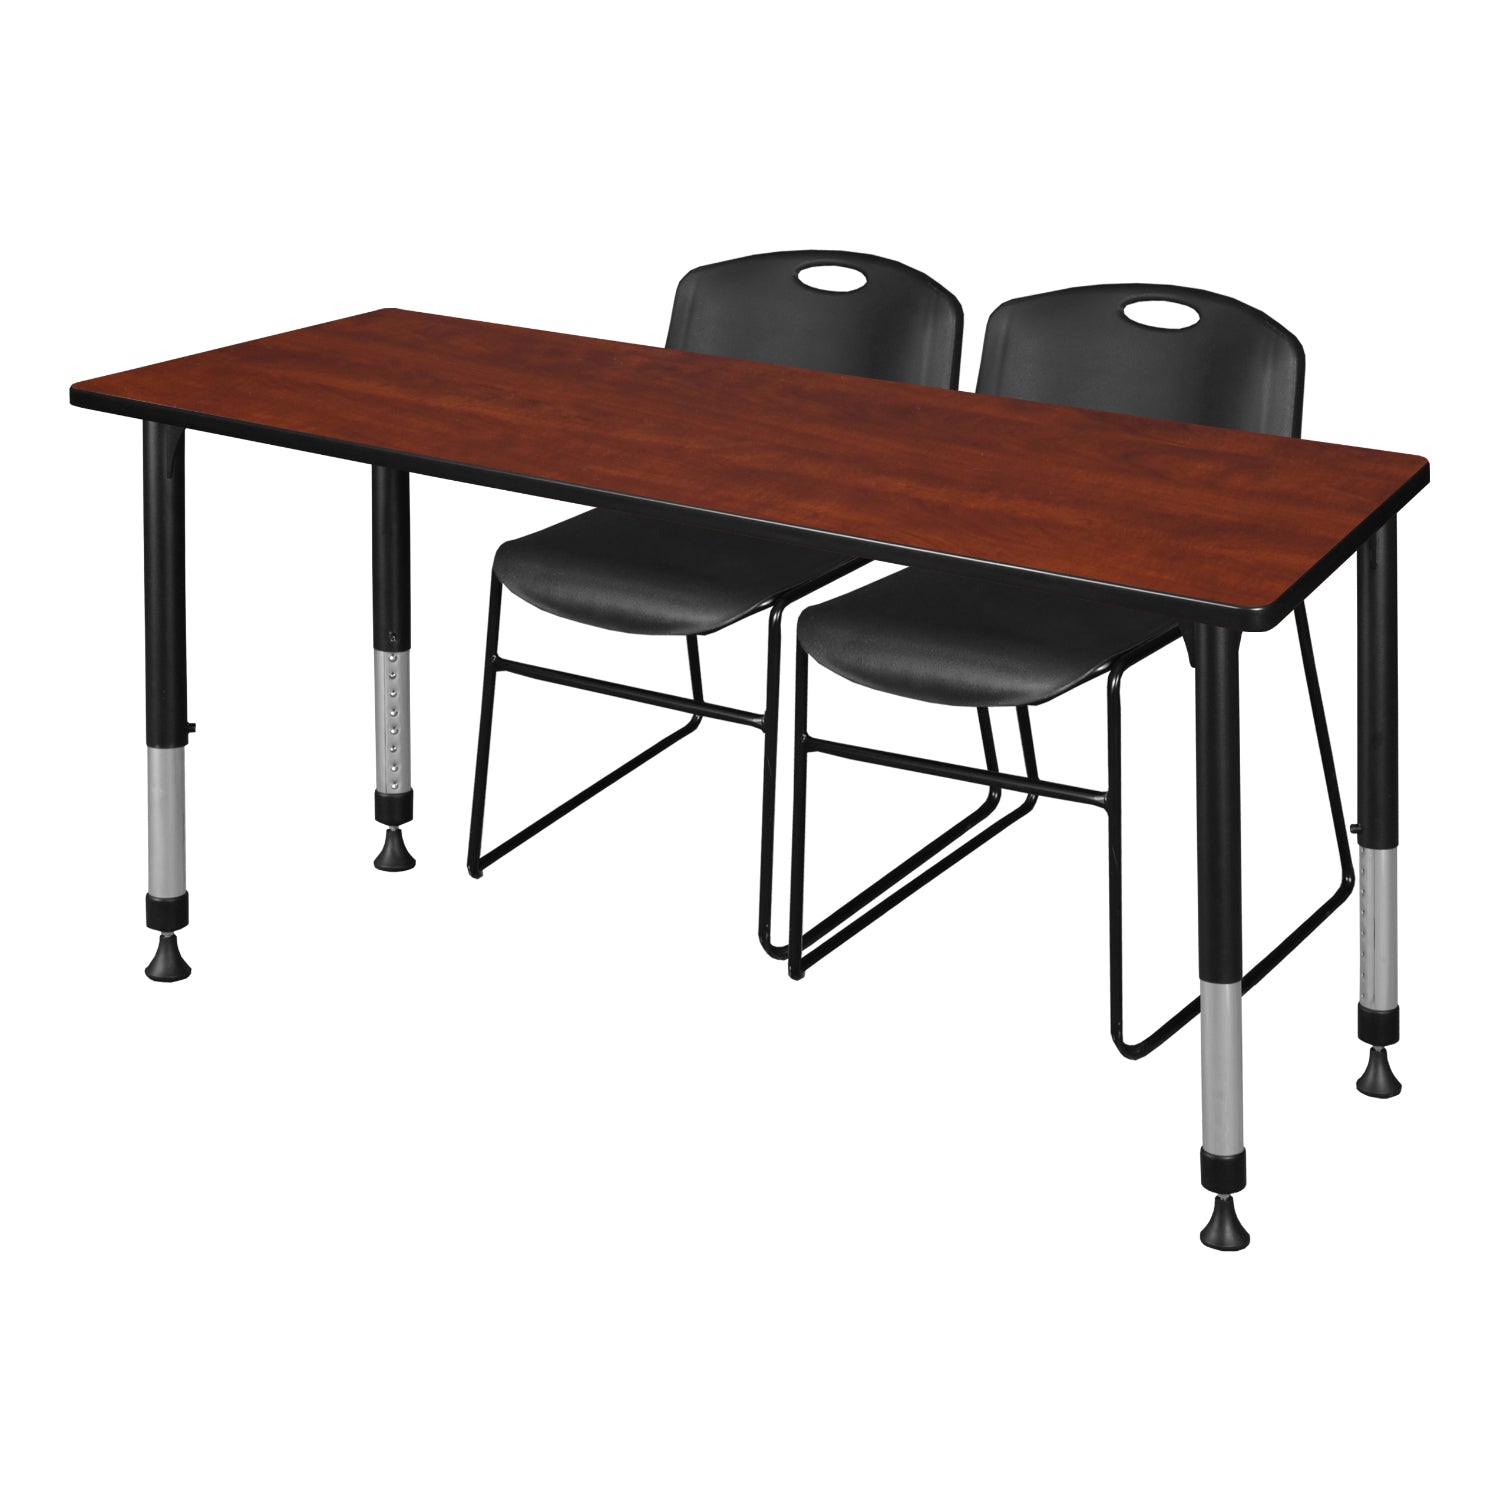 Kee Classroom Table and Chair Package, Kee 72" x 30" Rectangular Adjustable Height Table with 2 Black Zeng Stack Chairs